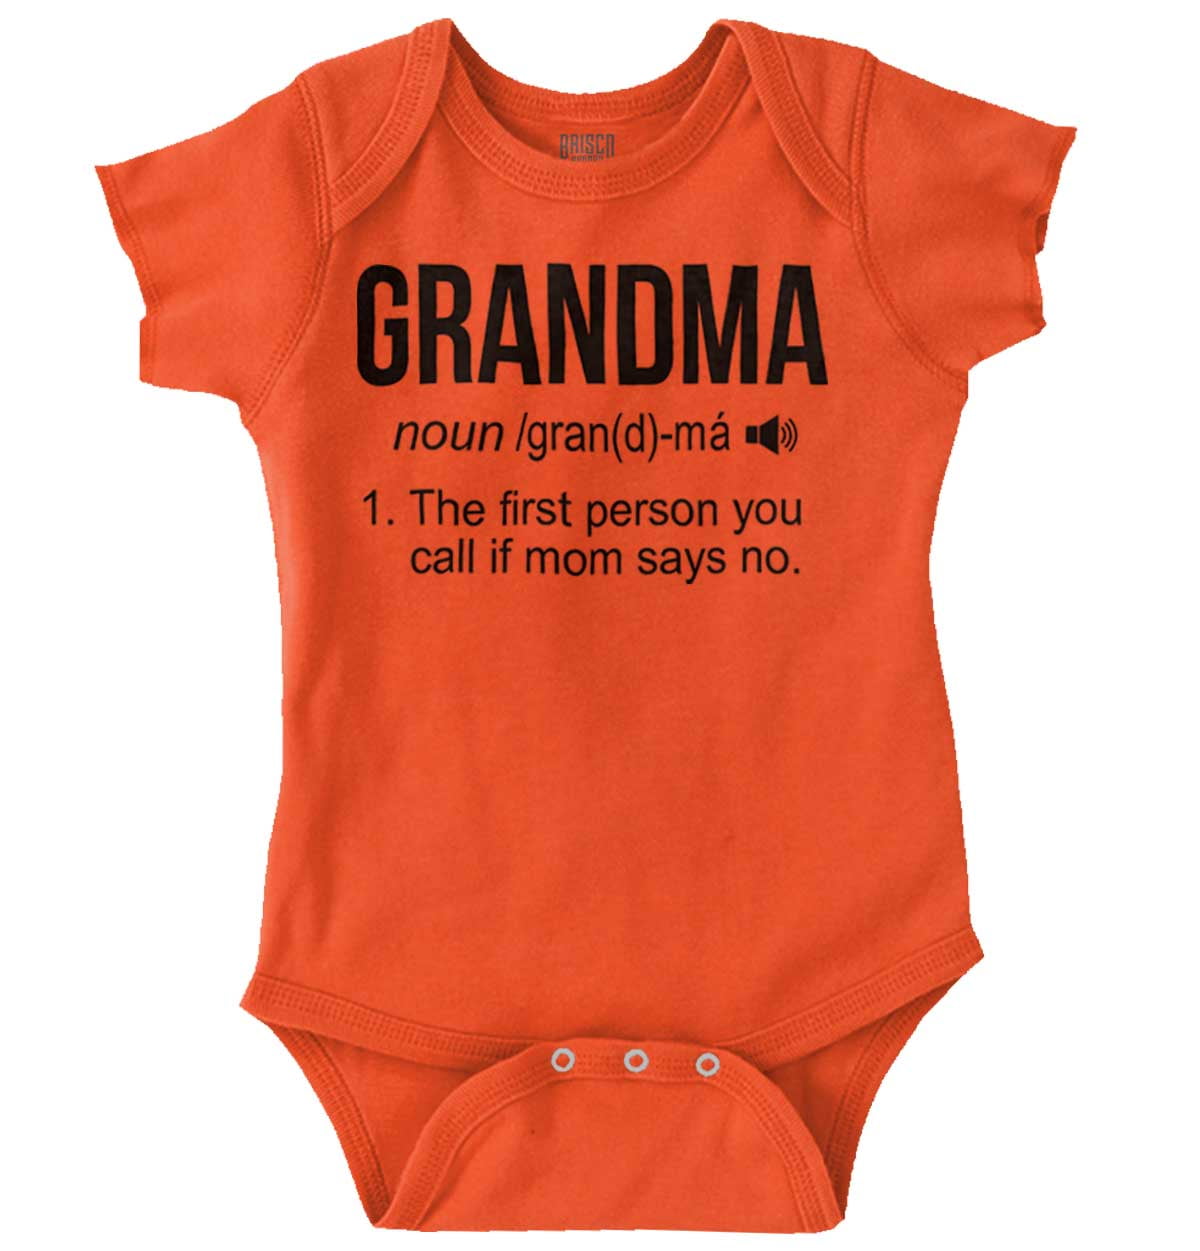 Witty Fashions Please Pass Me to Grandma Funny Gift for Newborn Grandmother Love Infant Baby Bodysuit